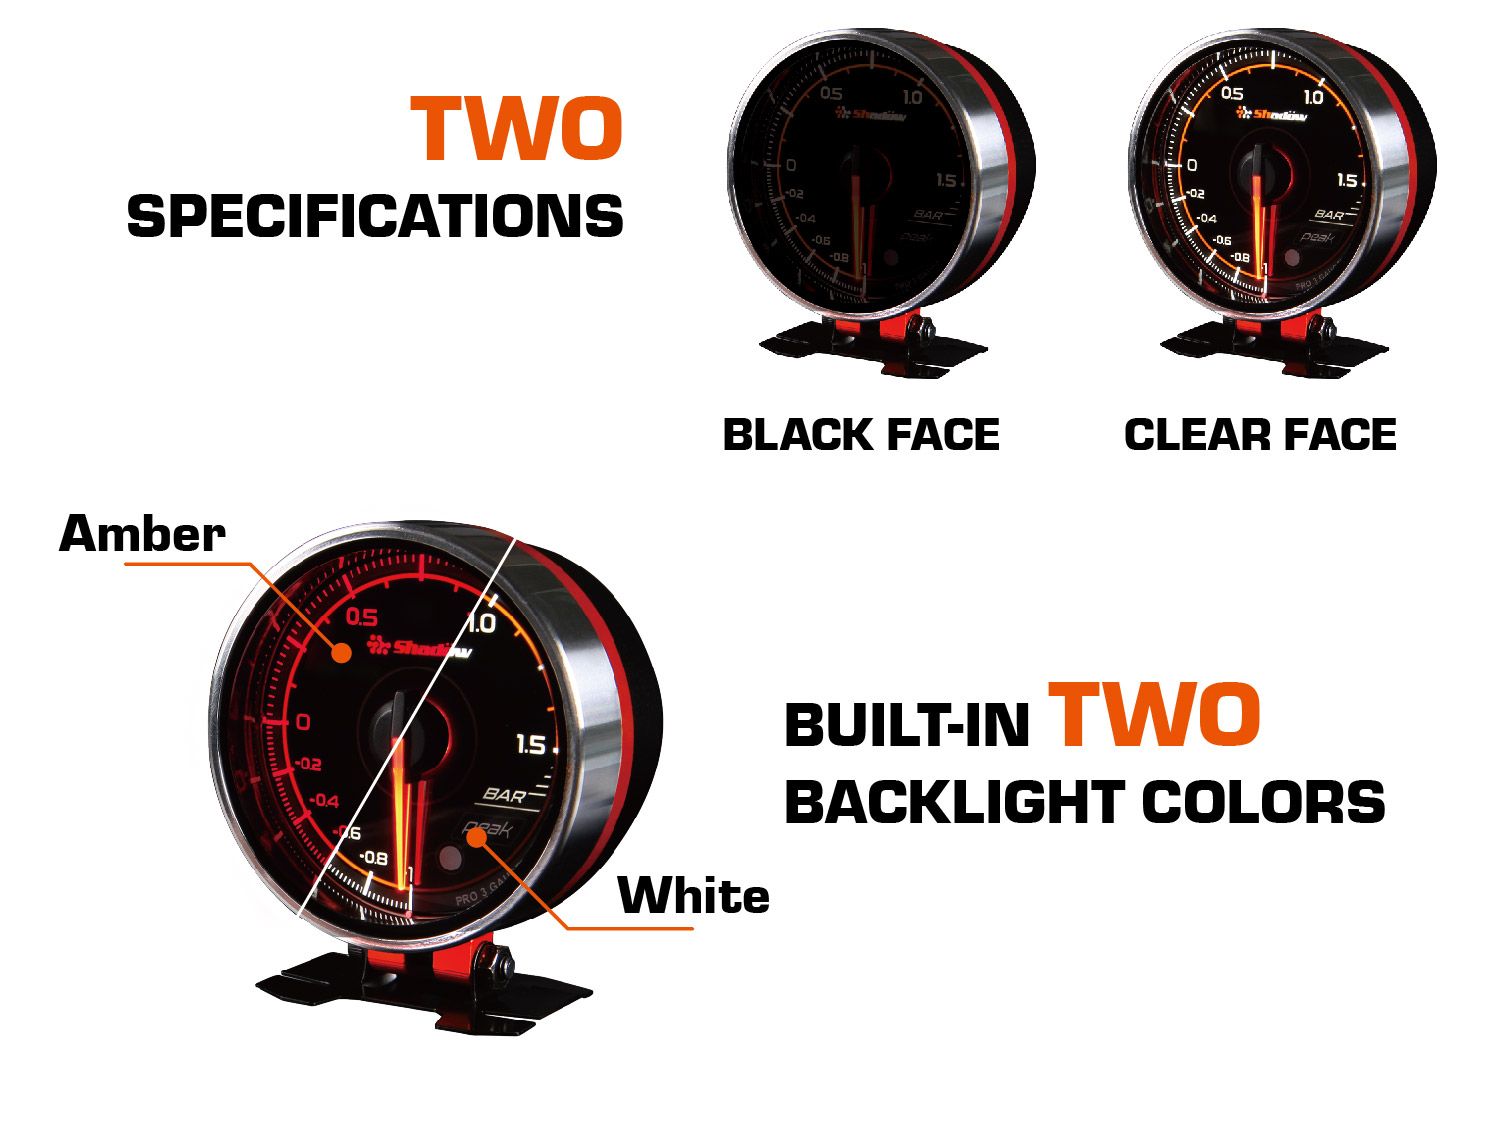 There areTwo specifications and built-in two backlight colors of Shadow PRO3 racing gauge